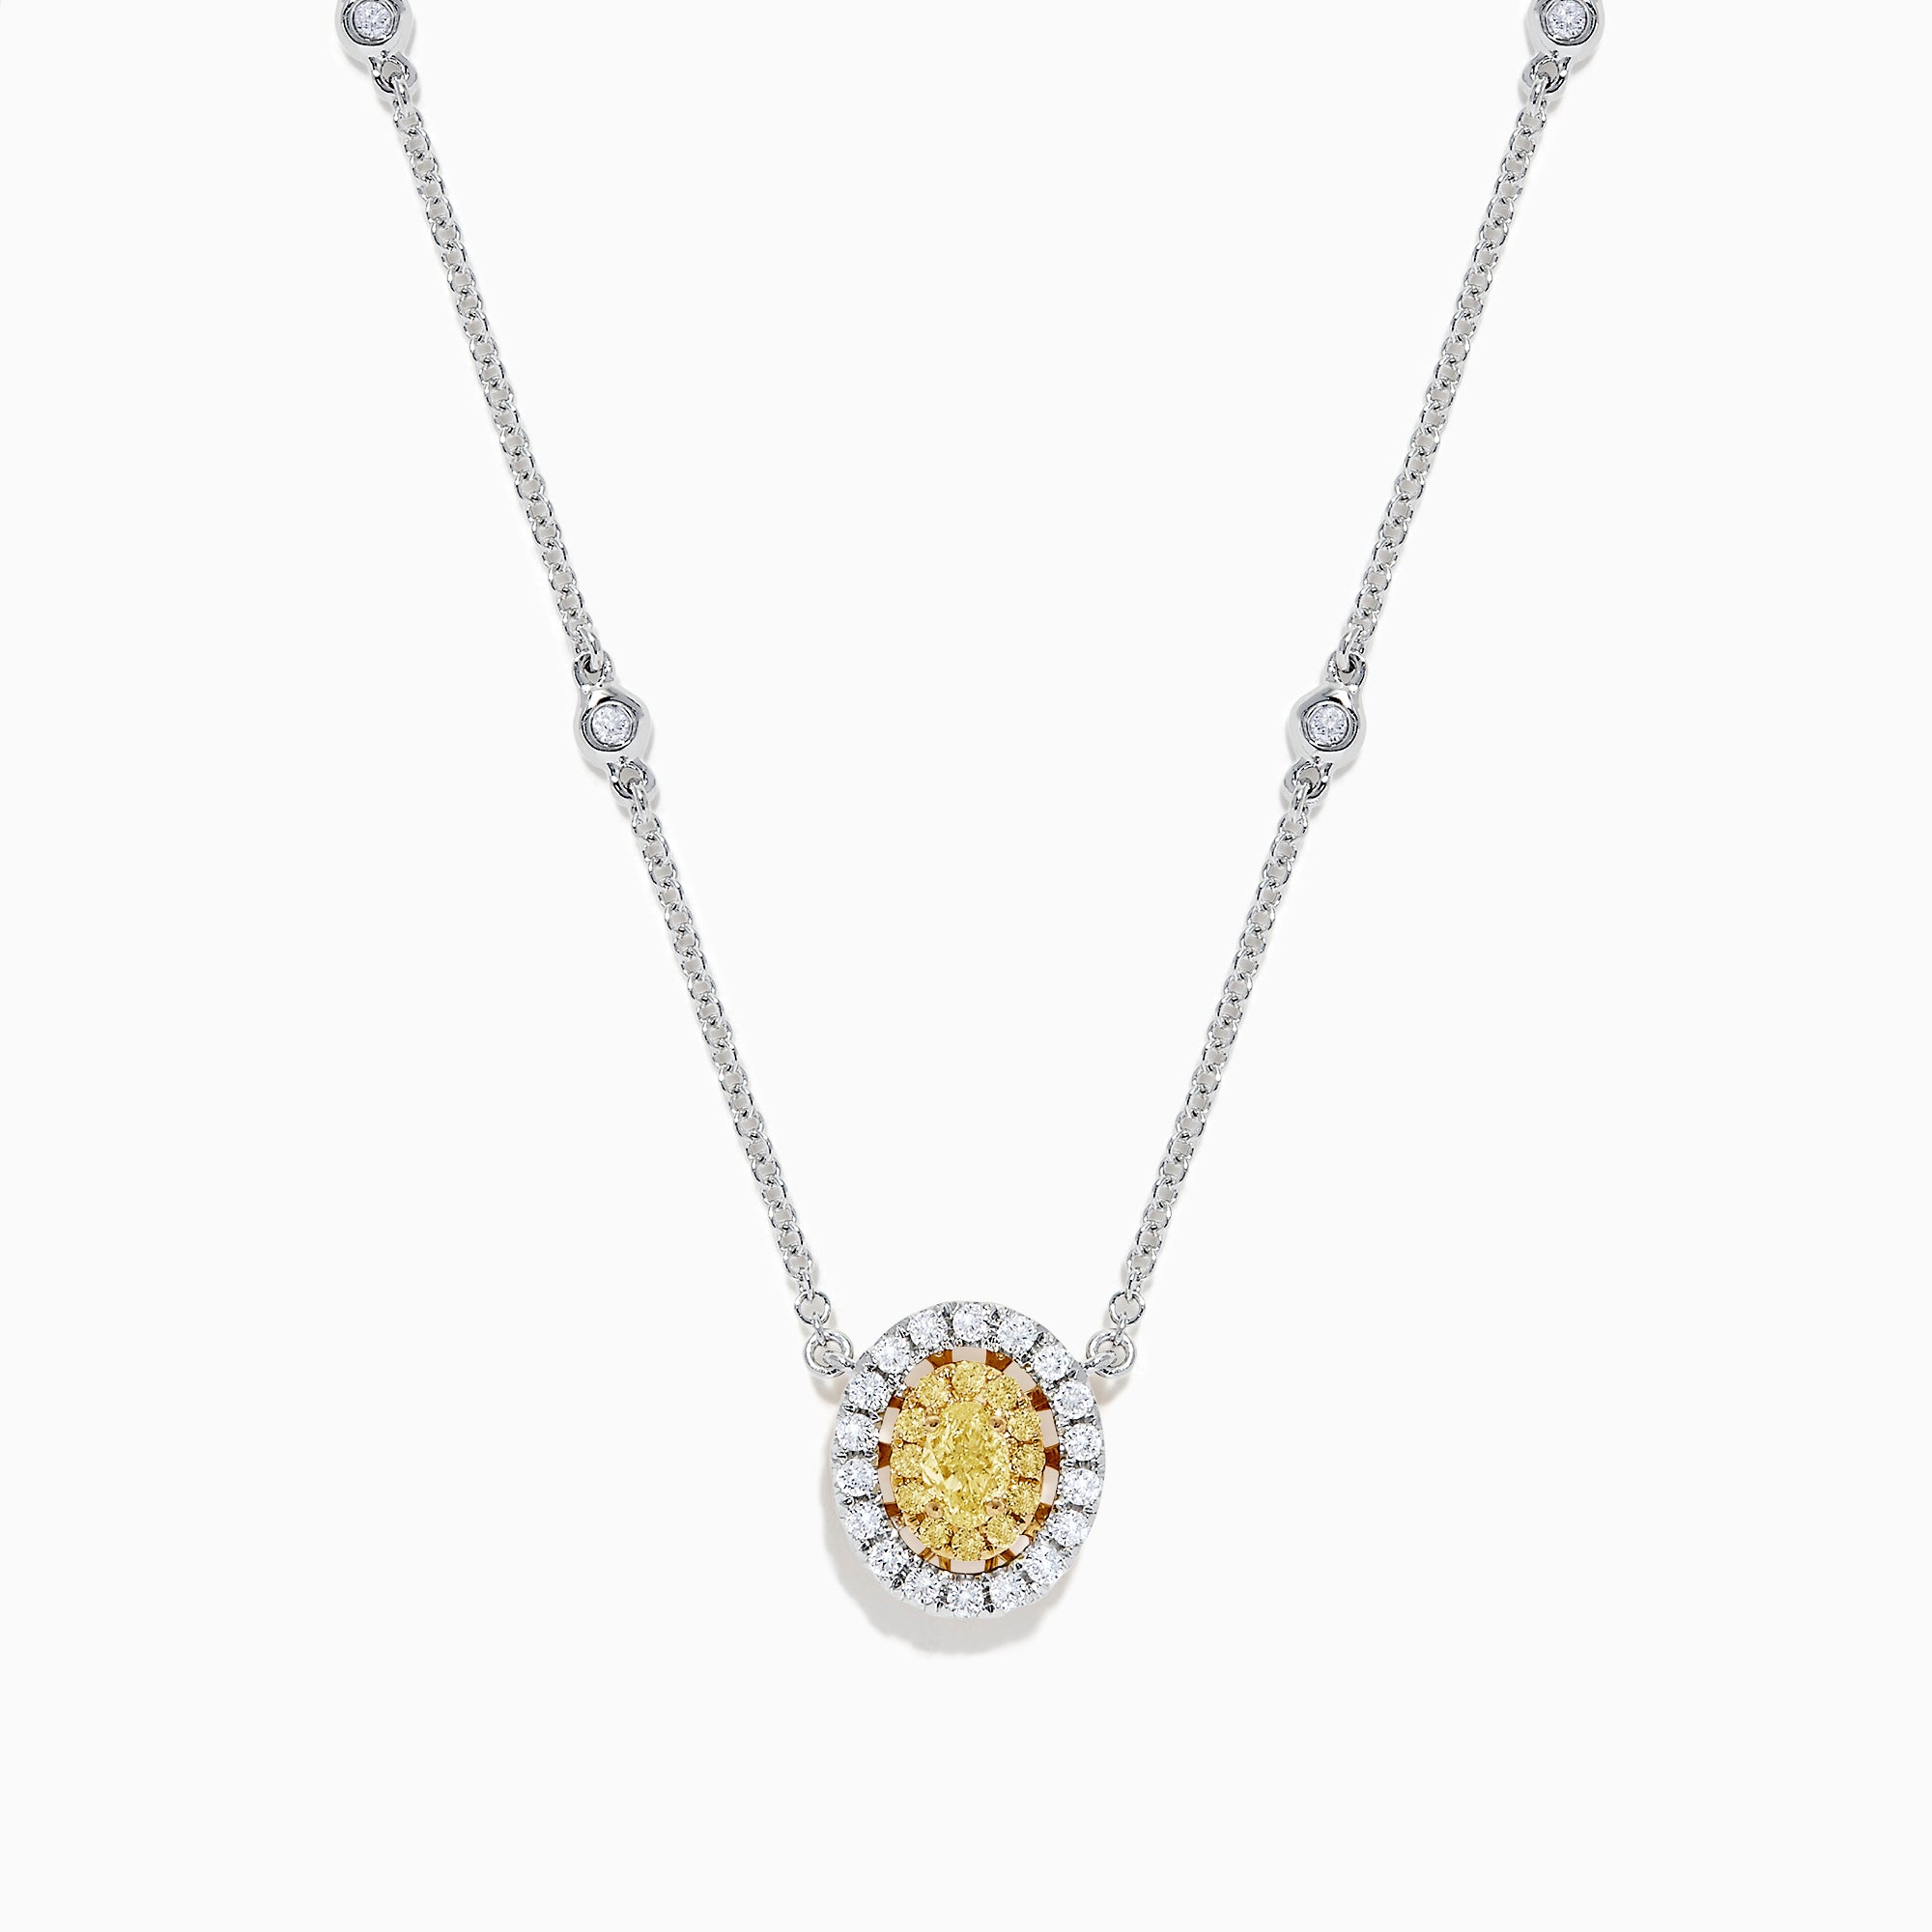 Effy Canare 14K White Gold Yellow and White Diamond Necklace, 0.81 TCW